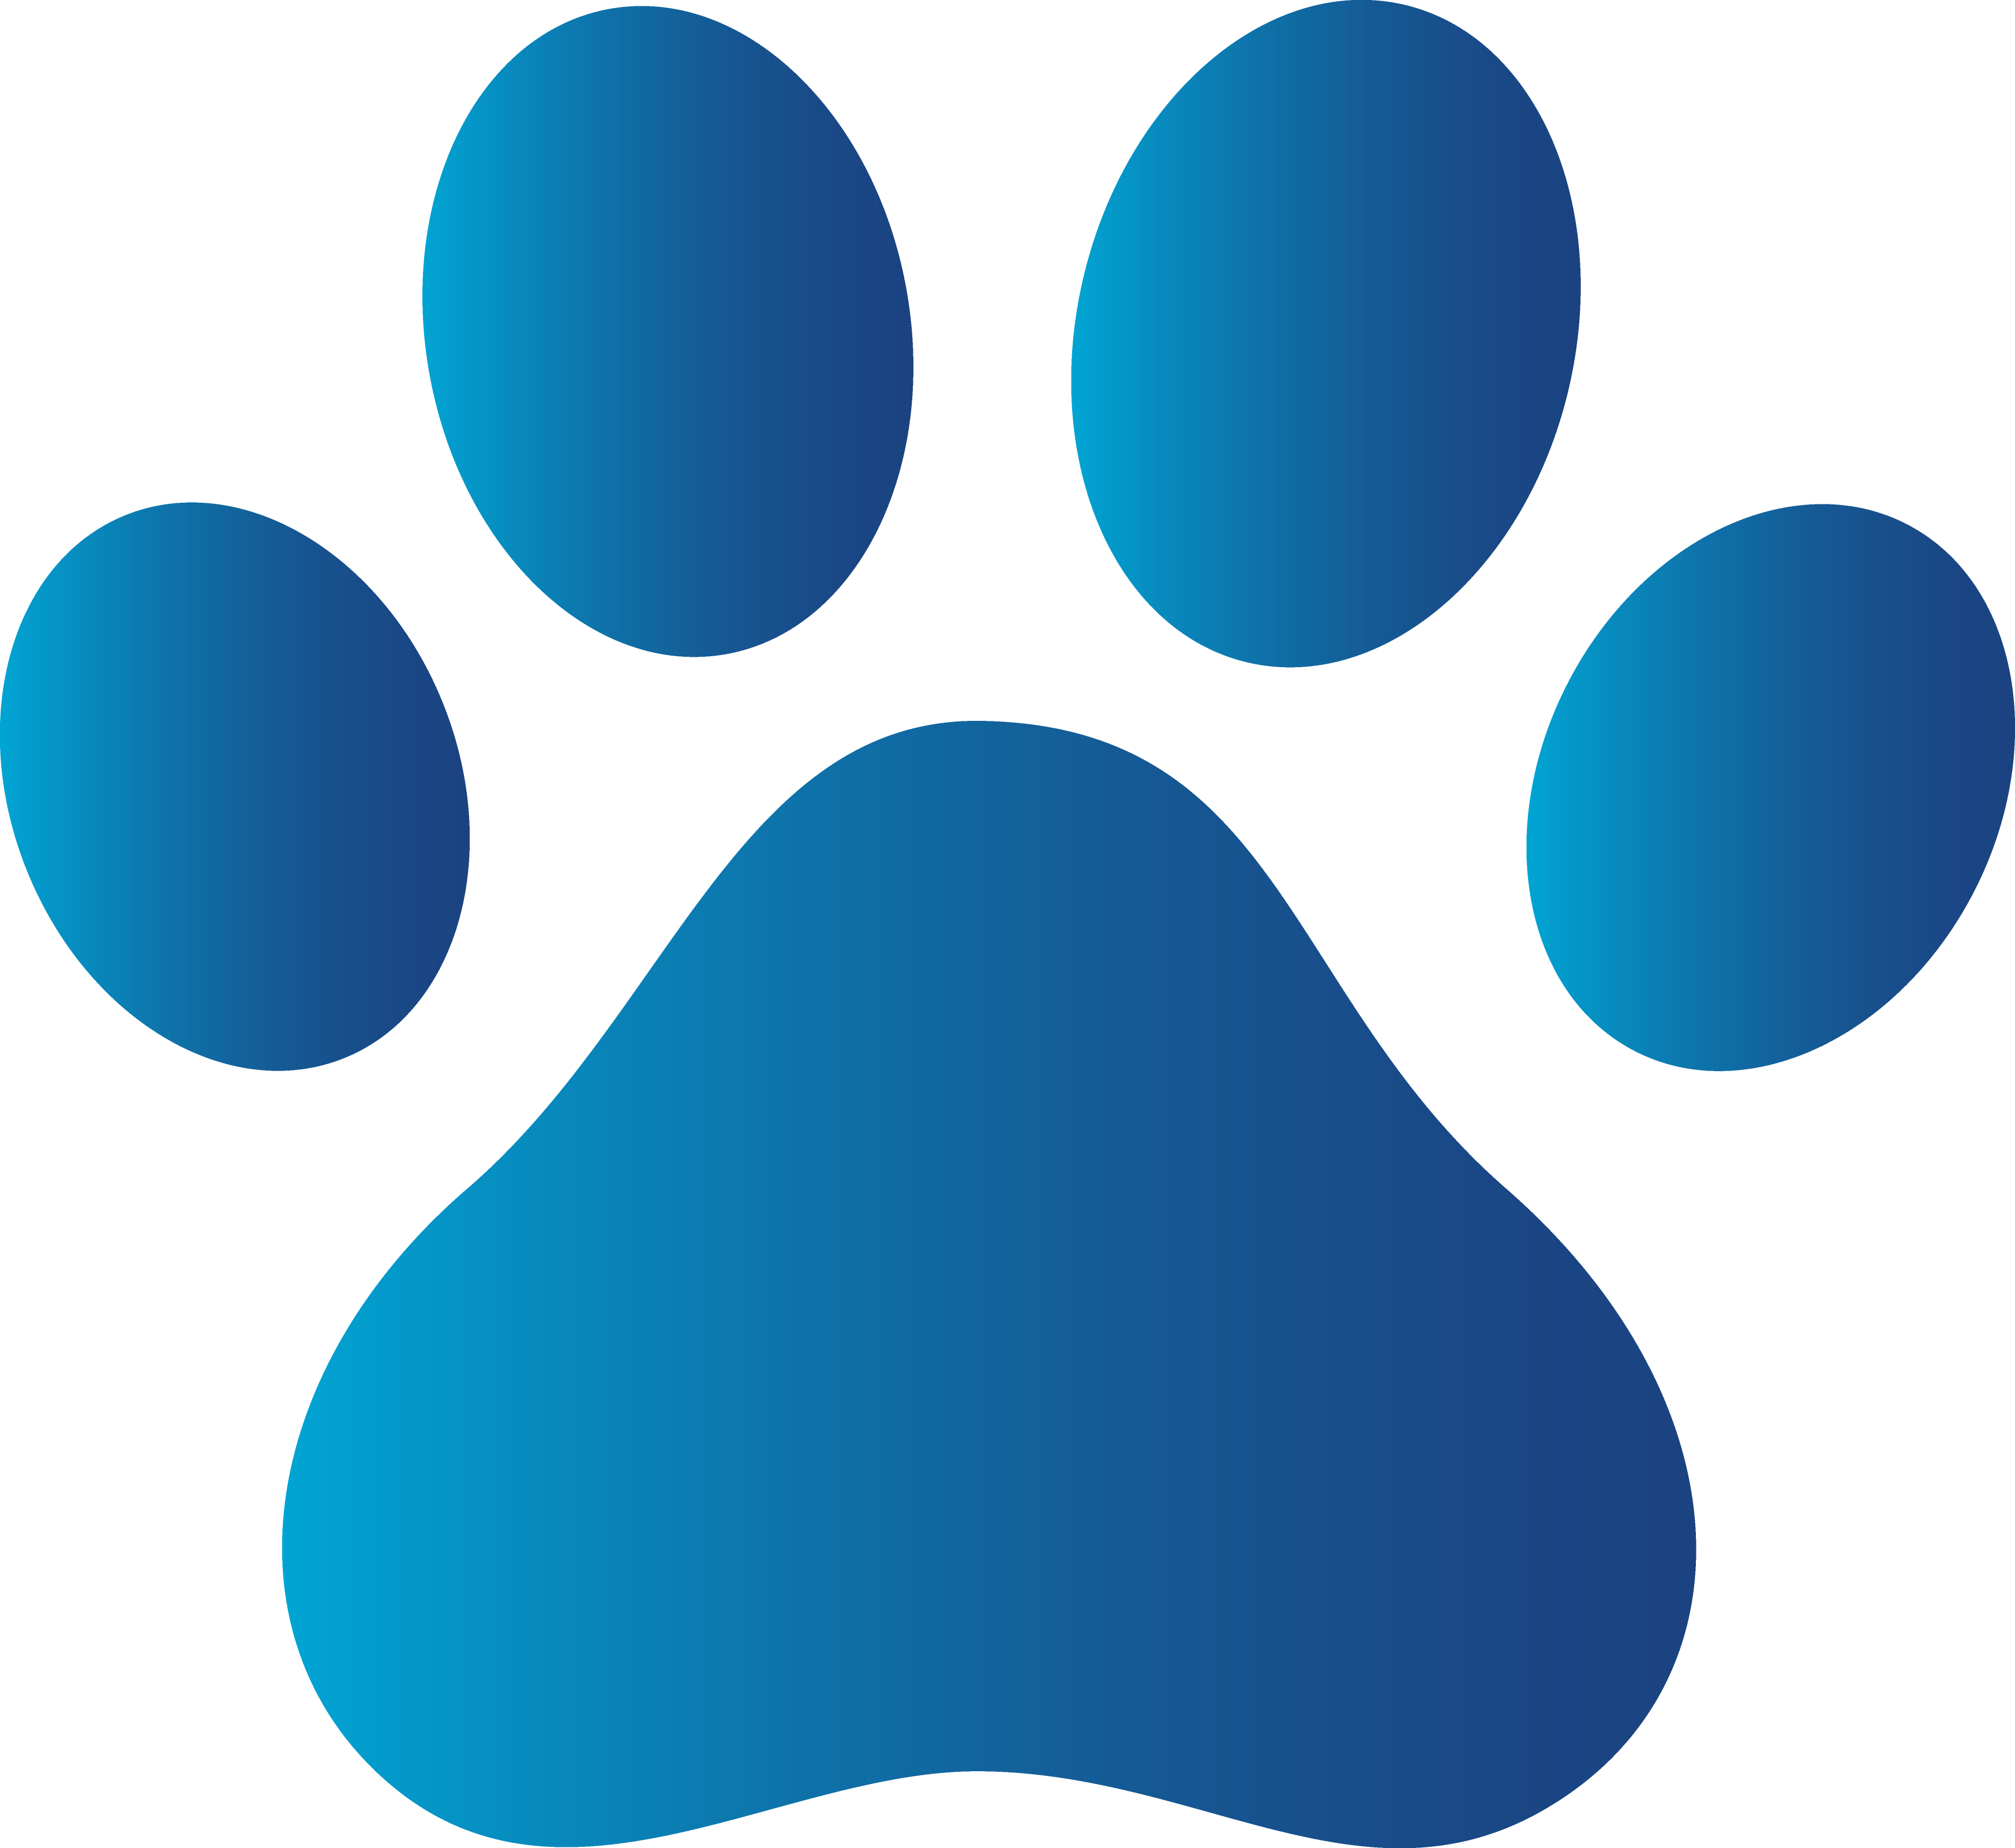 free-dog-paw-pictures-download-free-dog-paw-pictures-png-images-free-cliparts-on-clipart-library